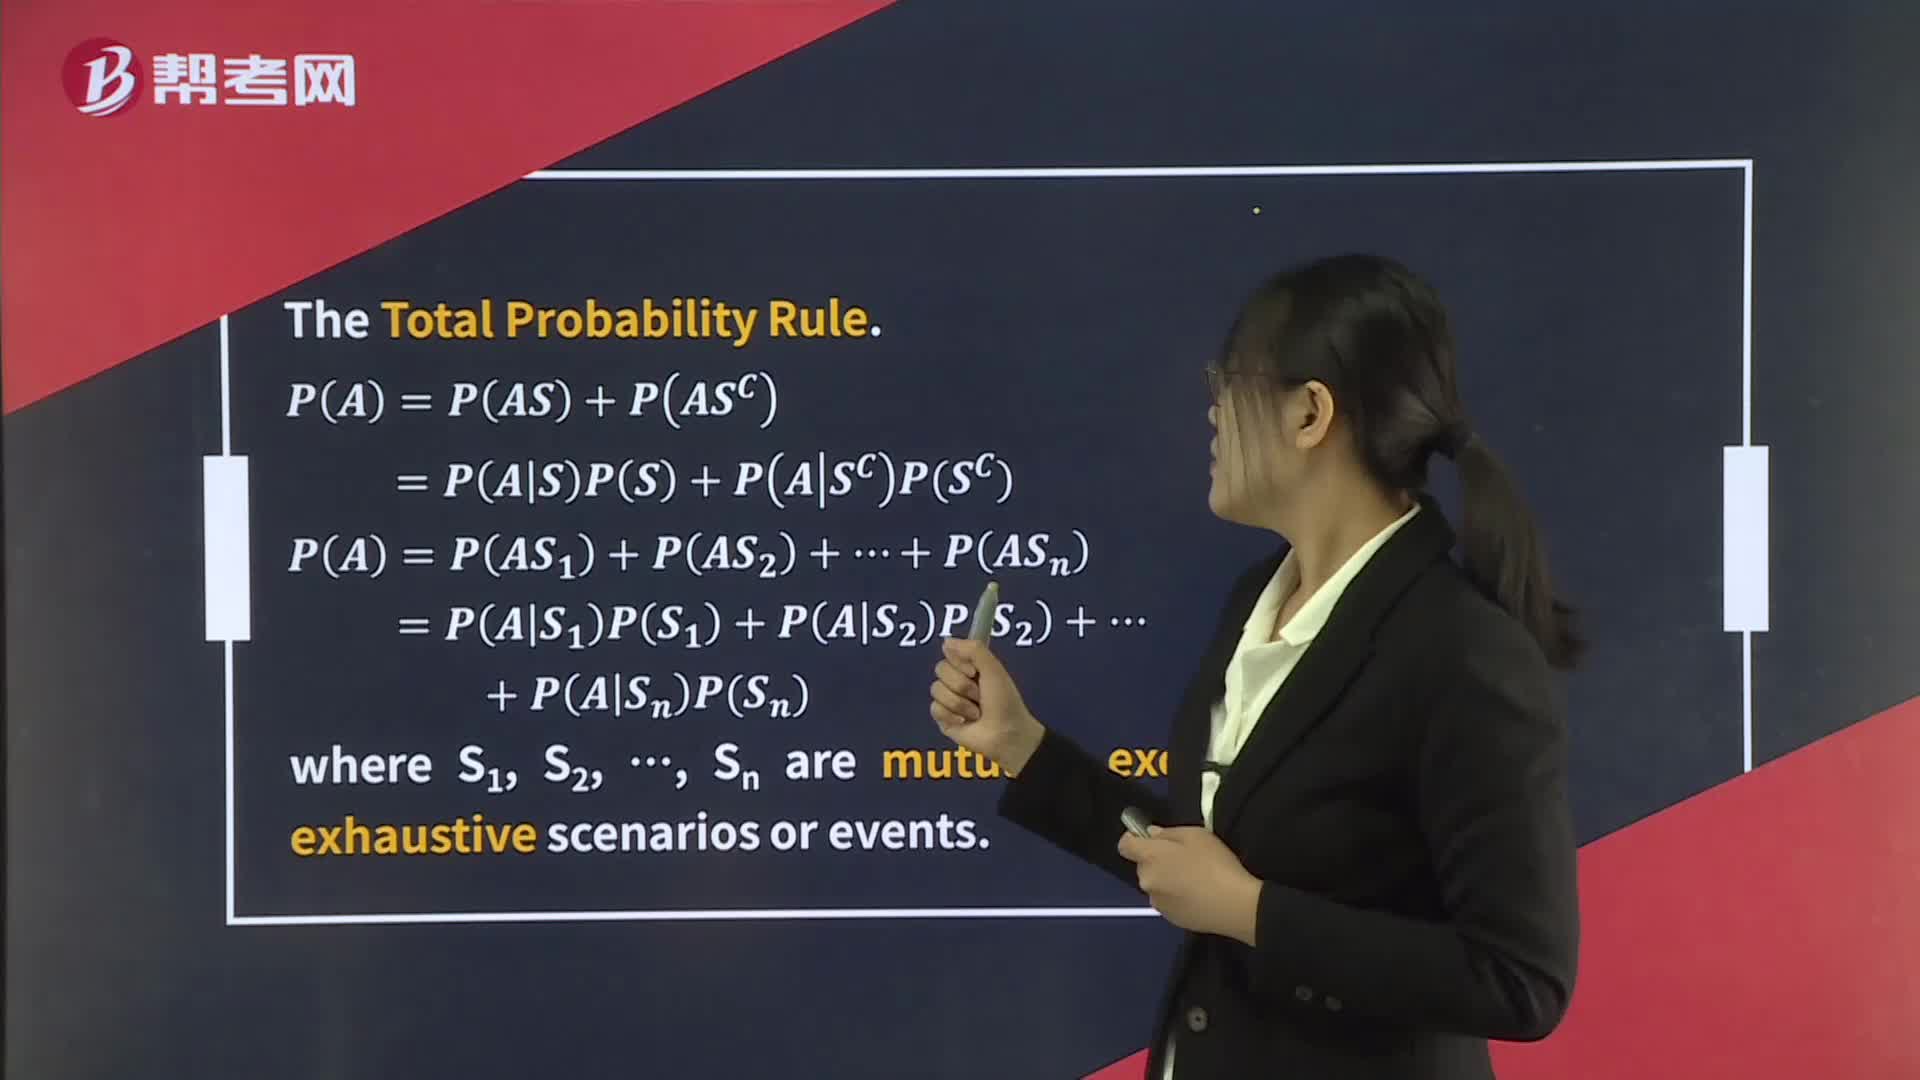 The Total Probability Rule